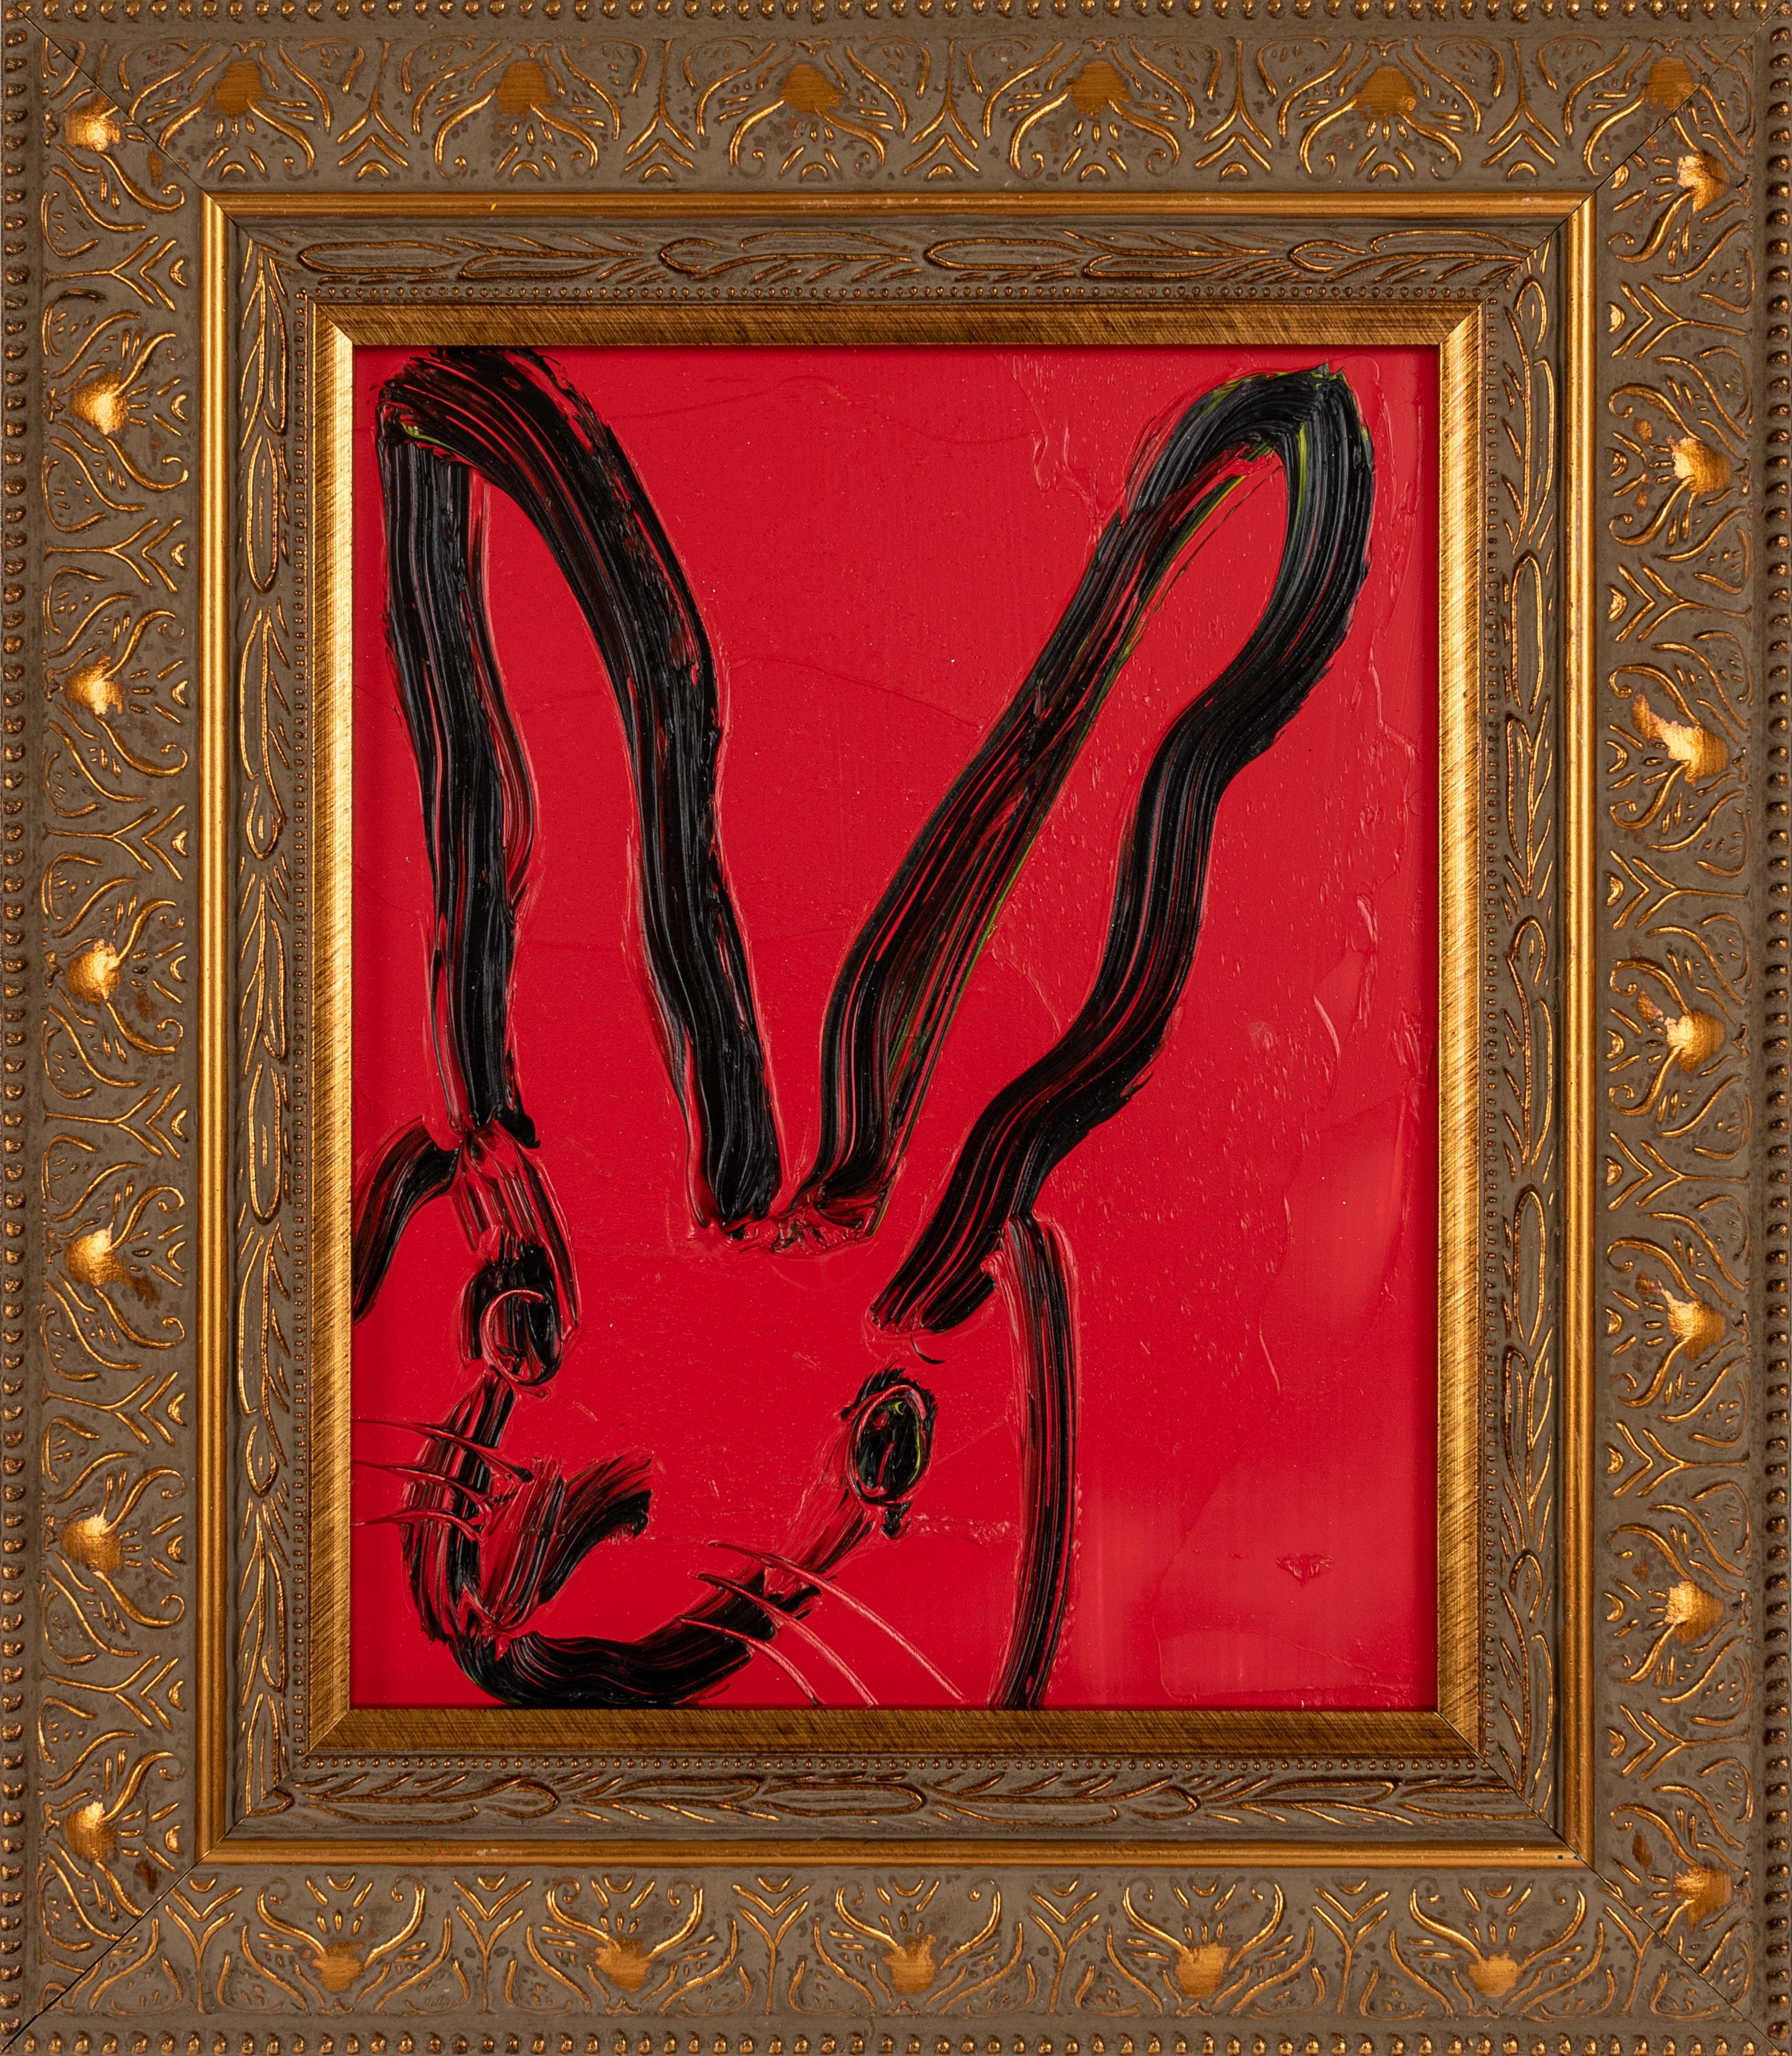 Painting size: 10 x 8 inches 
Framed size: 15 x 13 inches
Red gestural bunny painting by Hunt Slonem framed in gold. 
New York painter, Hunt Slonem is best known for his Neo –Expressionist paintings of bunnies, tropical birds and other exotic flora